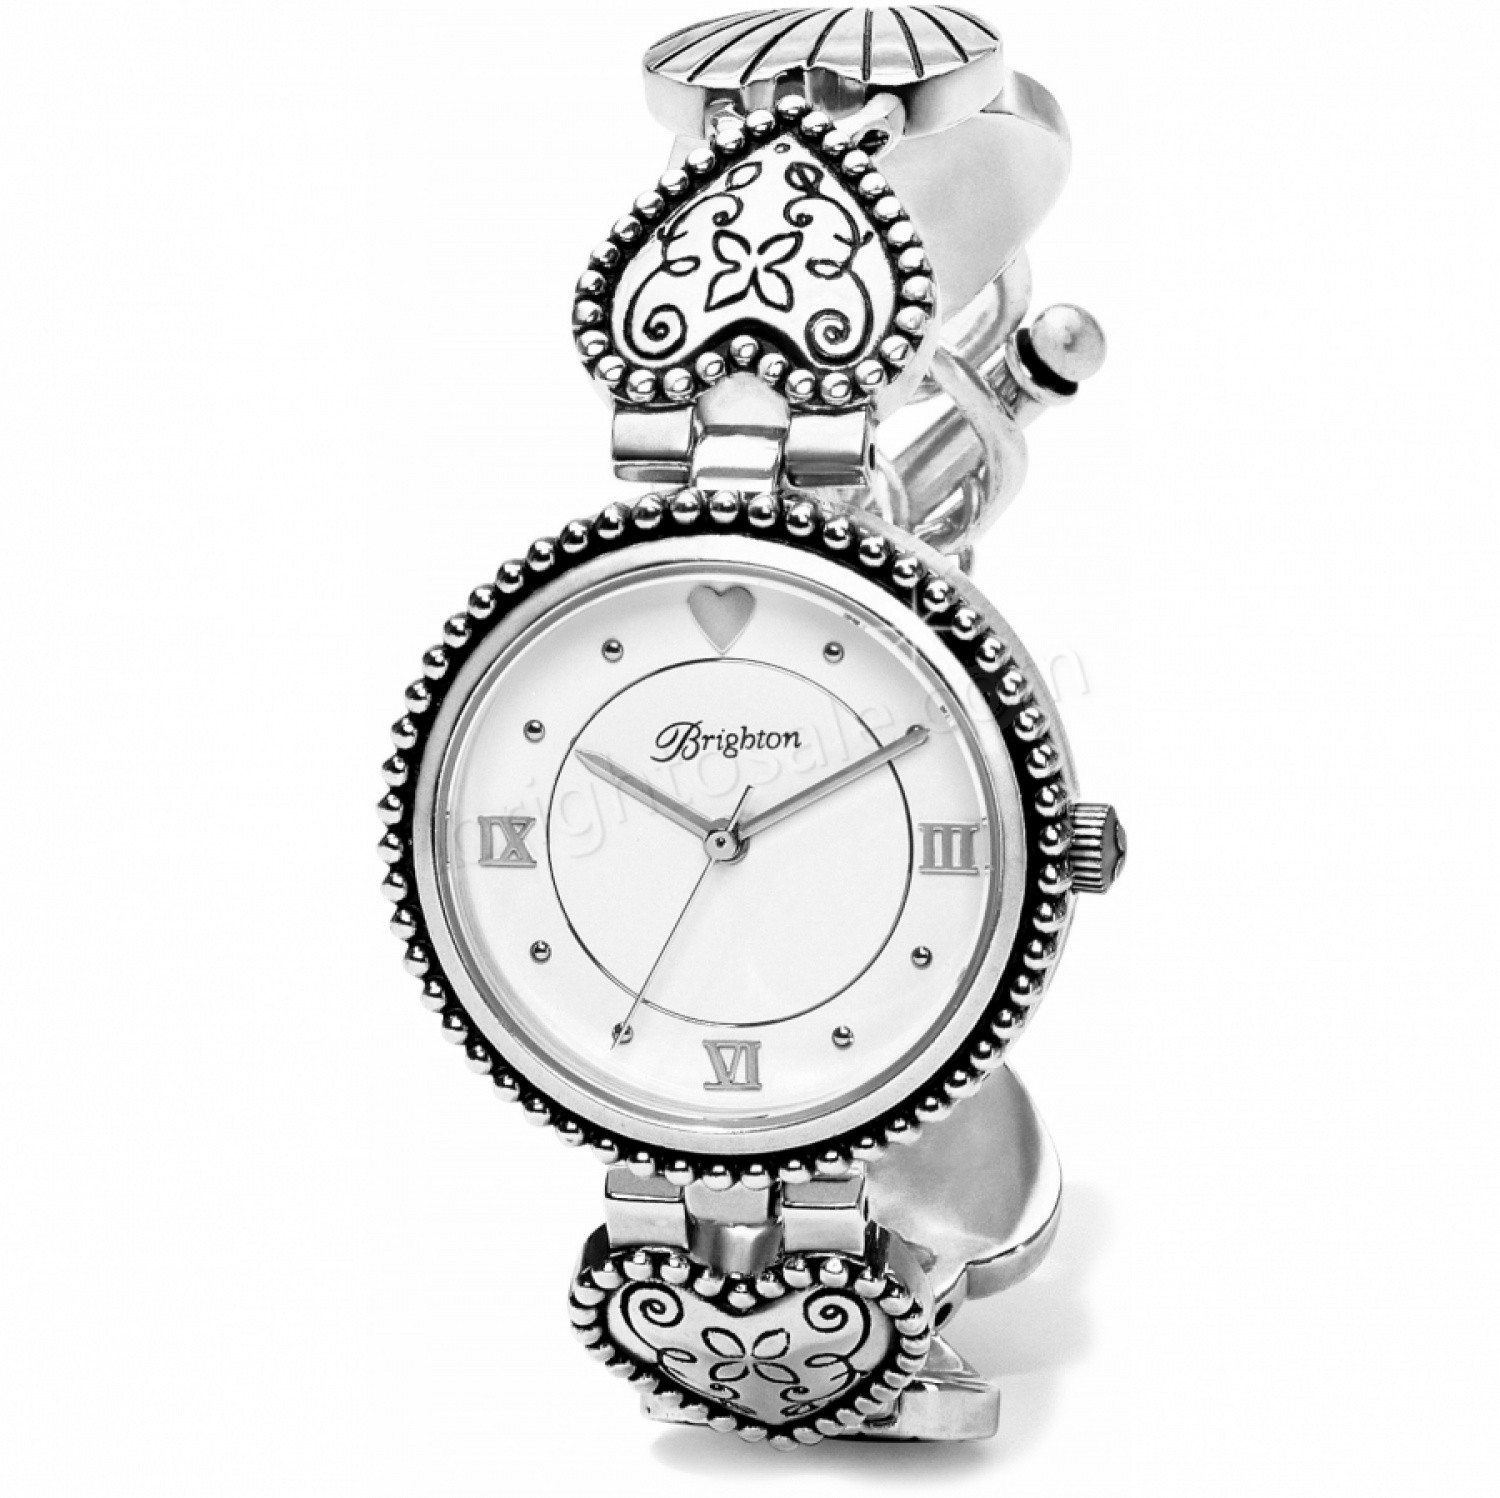 Brighton Collectibles & Online Discount All Your Love Watch - Brighton Collectibles & Online Discount All Your Love Watch